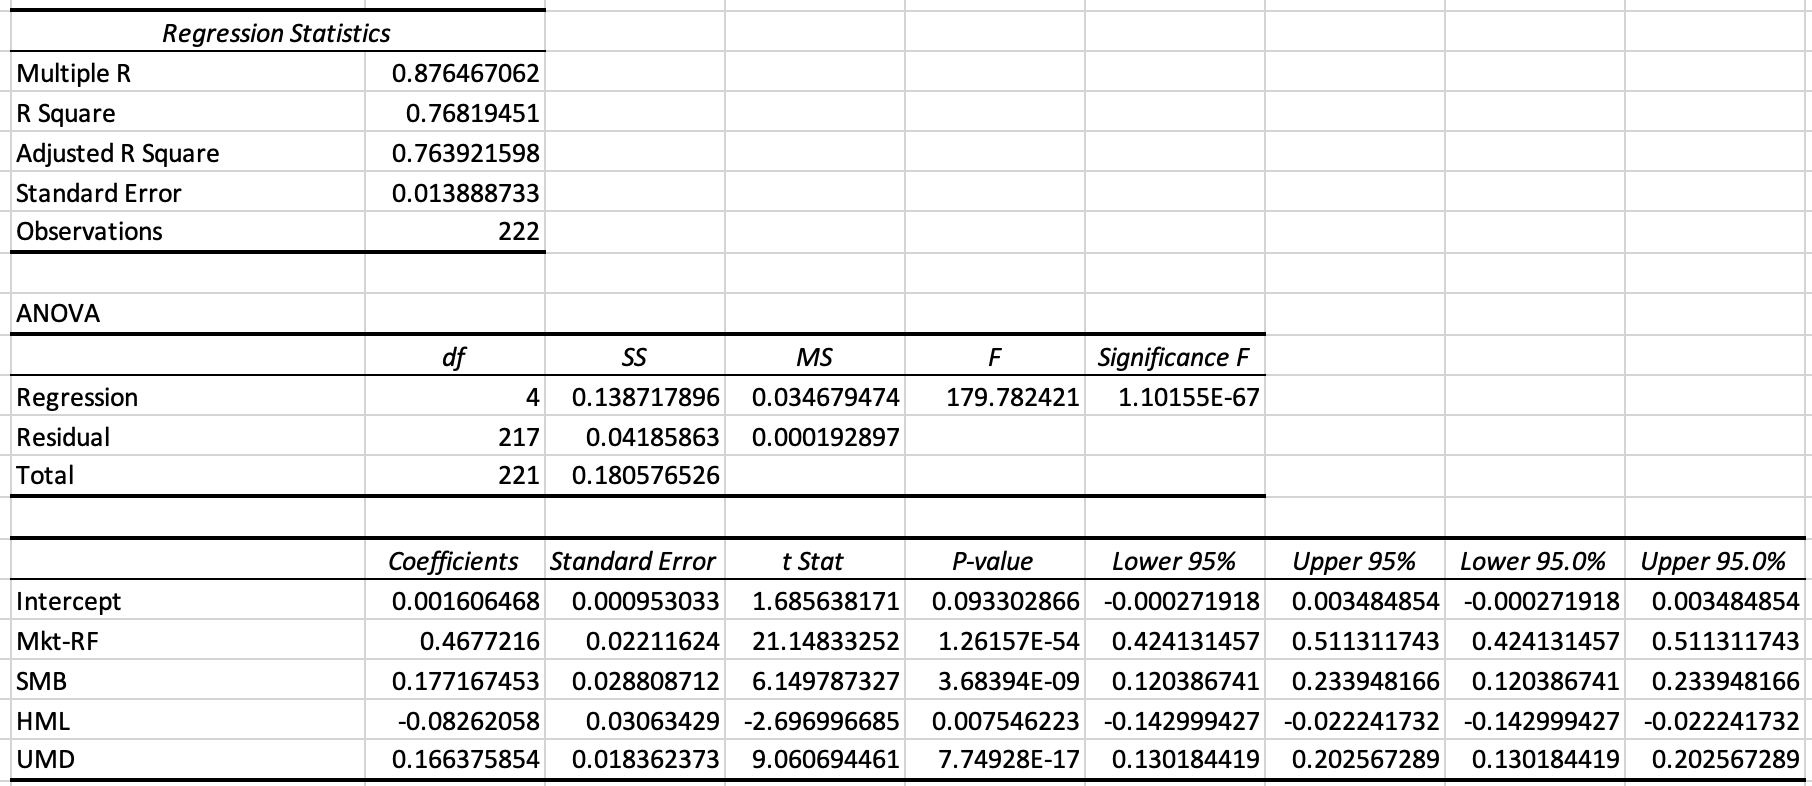 Regression from the Excel file on Moodle.